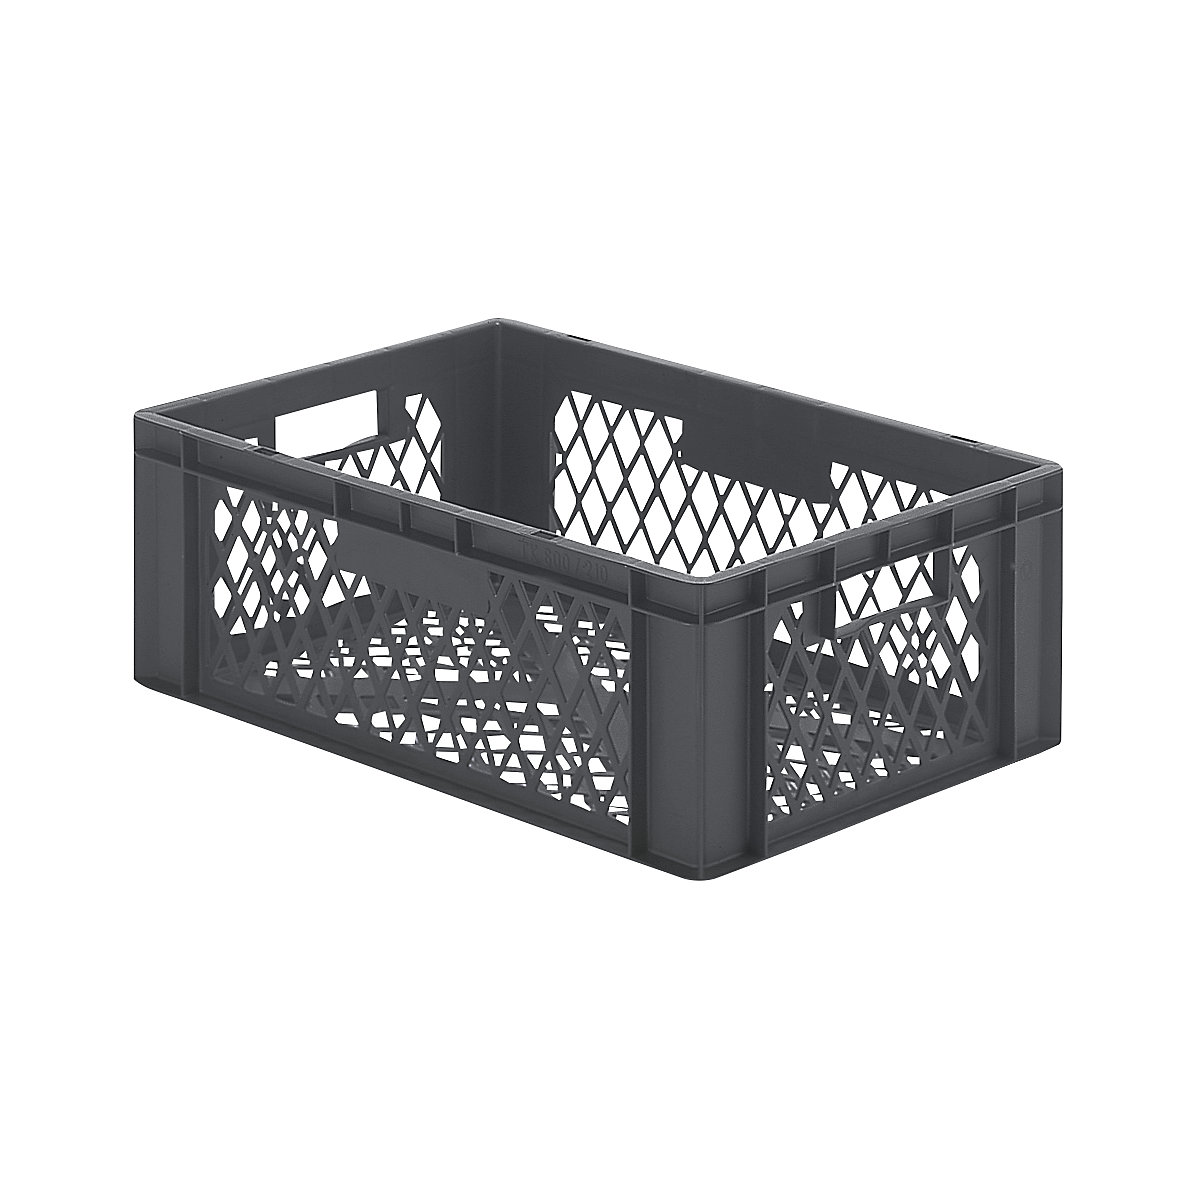 Euro stacking container, perforated walls and base, LxWxH 600 x 400 x 210 mm, grey, pack of 5